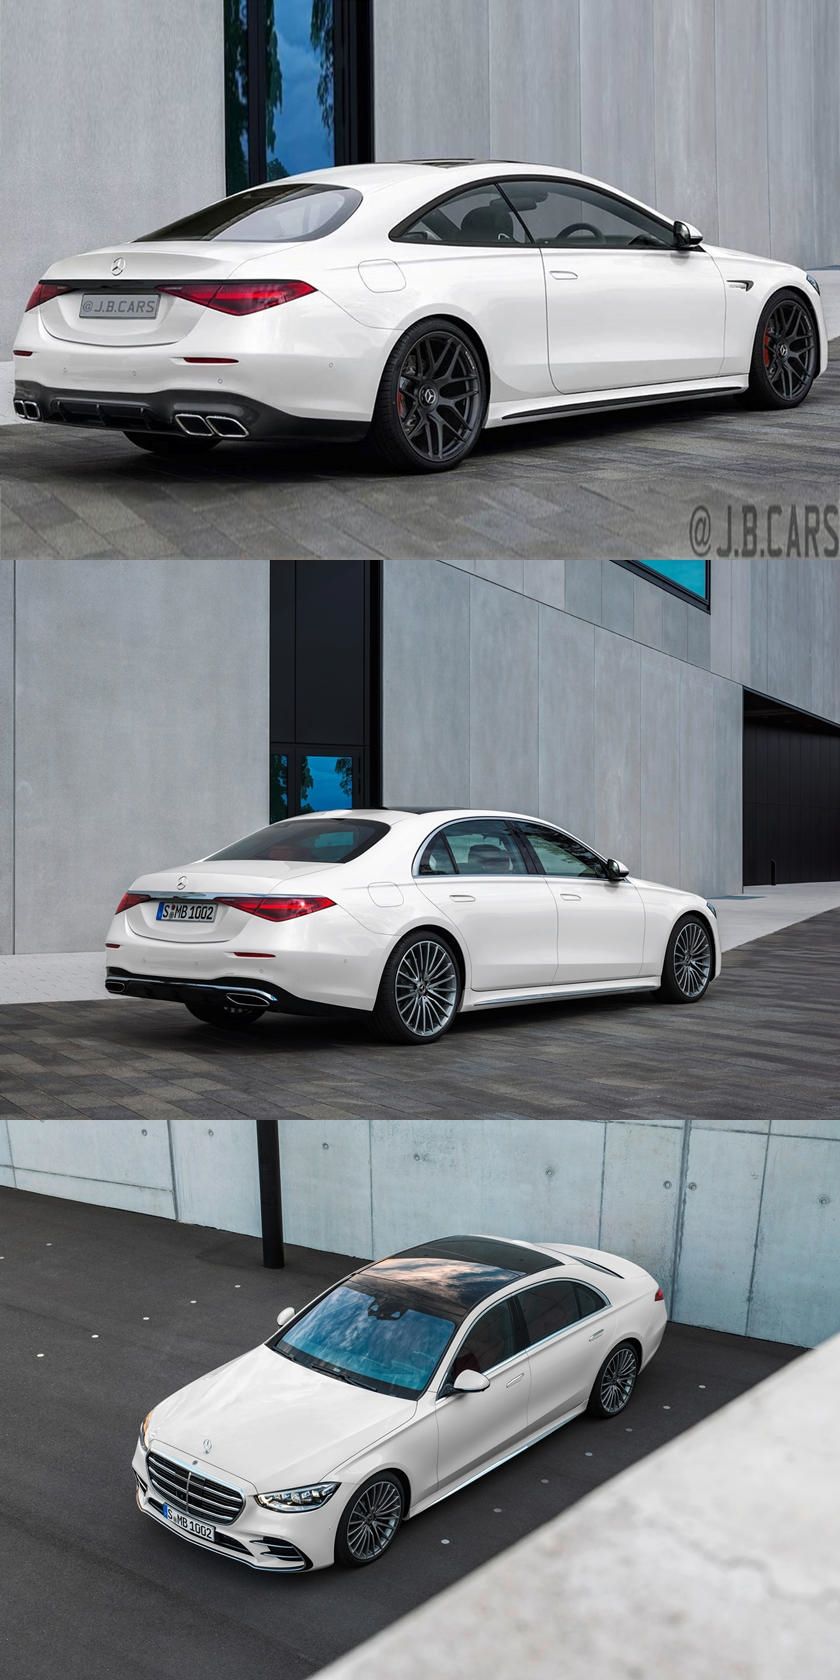 This Is What The 2021 Mercedes-AMG S63 Coupe Would Look Like. If only  Mercedes would actually build it. | Benz s, Mercedes benz cars, Mercedes amg